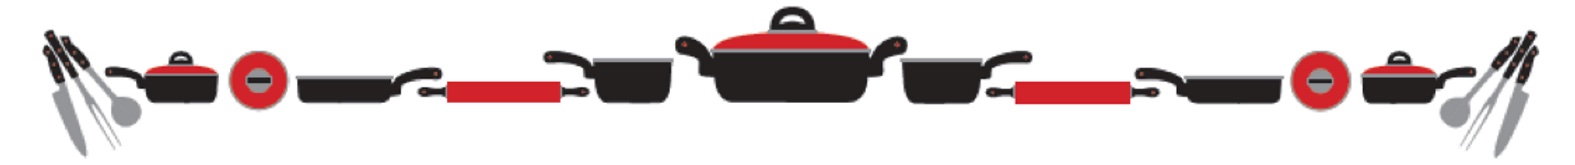 Culinary Footer for the MRE Challenge with image symbols of pots and pans